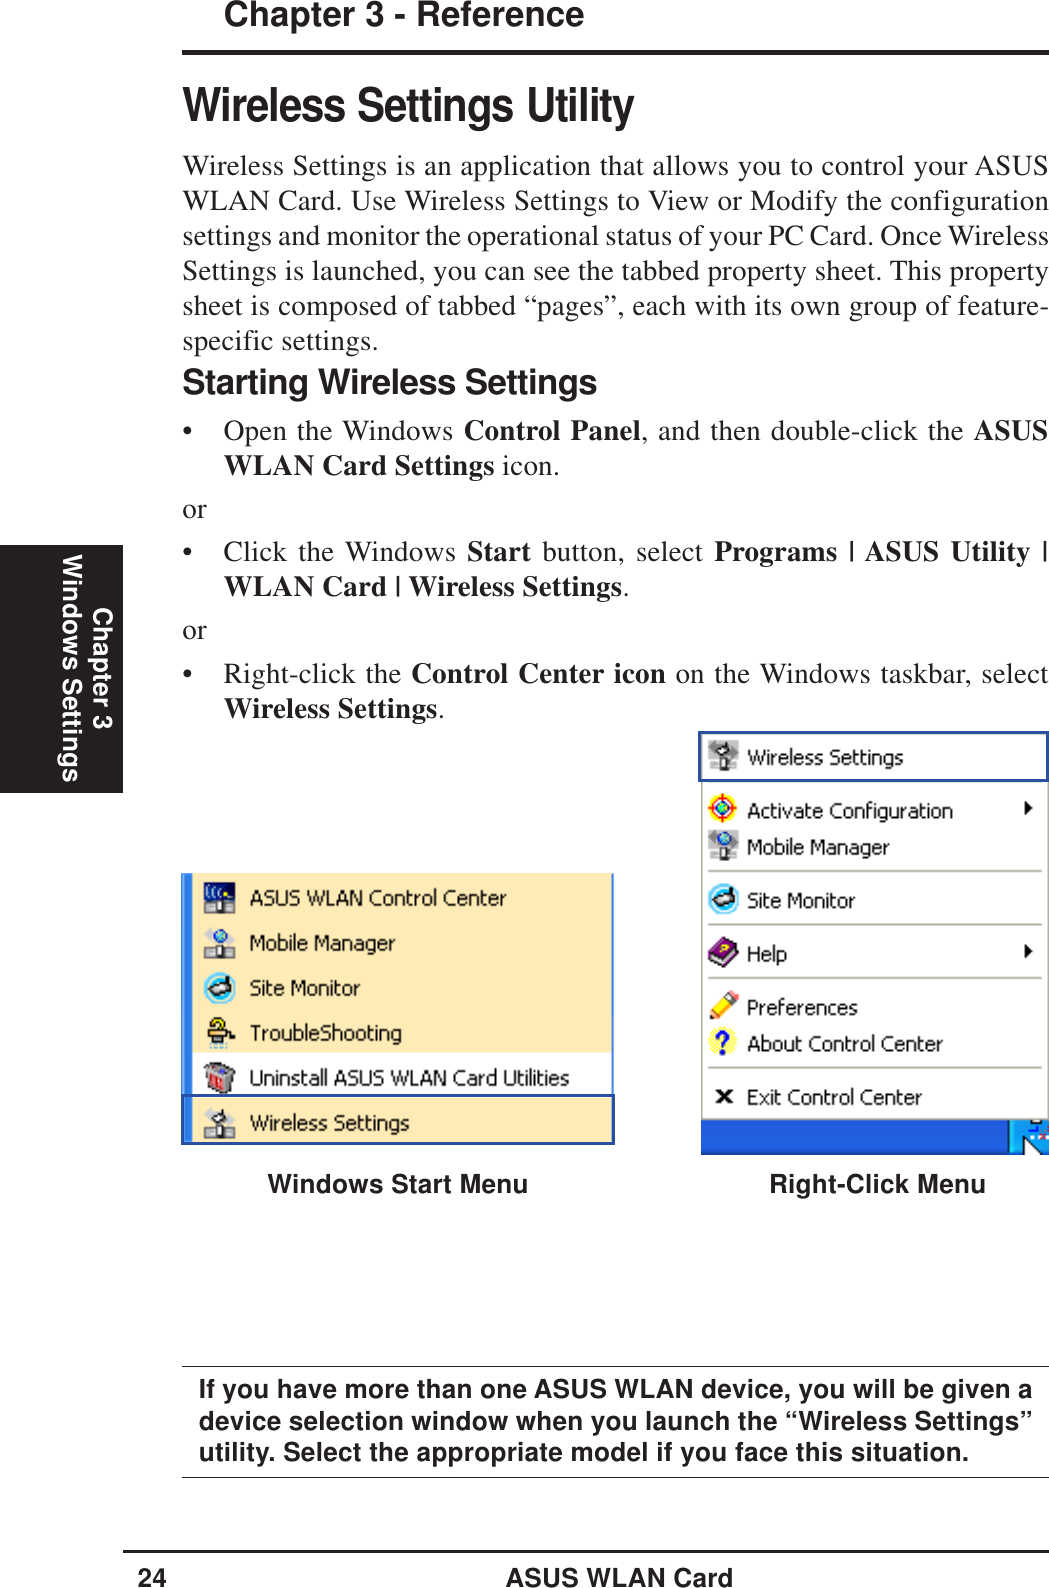 24 ASUS WLAN CardChapter 3 - ReferenceChapter 3Windows SettingsWireless Settings UtilityWireless Settings is an application that allows you to control your ASUSWLAN Card. Use Wireless Settings to View or Modify the configurationsettings and monitor the operational status of your PC Card. Once WirelessSettings is launched, you can see the tabbed property sheet. This propertysheet is composed of tabbed “pages”, each with its own group of feature-specific settings.Right-Click MenuIf you have more than one ASUS WLAN device, you will be given adevice selection window when you launch the “Wireless Settings”utility. Select the appropriate model if you face this situation.Starting Wireless Settings• Open the Windows Control Panel, and then double-click the ASUSWLAN Card Settings icon.or• Click the Windows Start button, select Programs | ASUS Utility |WLAN Card | Wireless Settings.or• Right-click the Control Center icon on the Windows taskbar, selectWireless Settings.Windows Start Menu